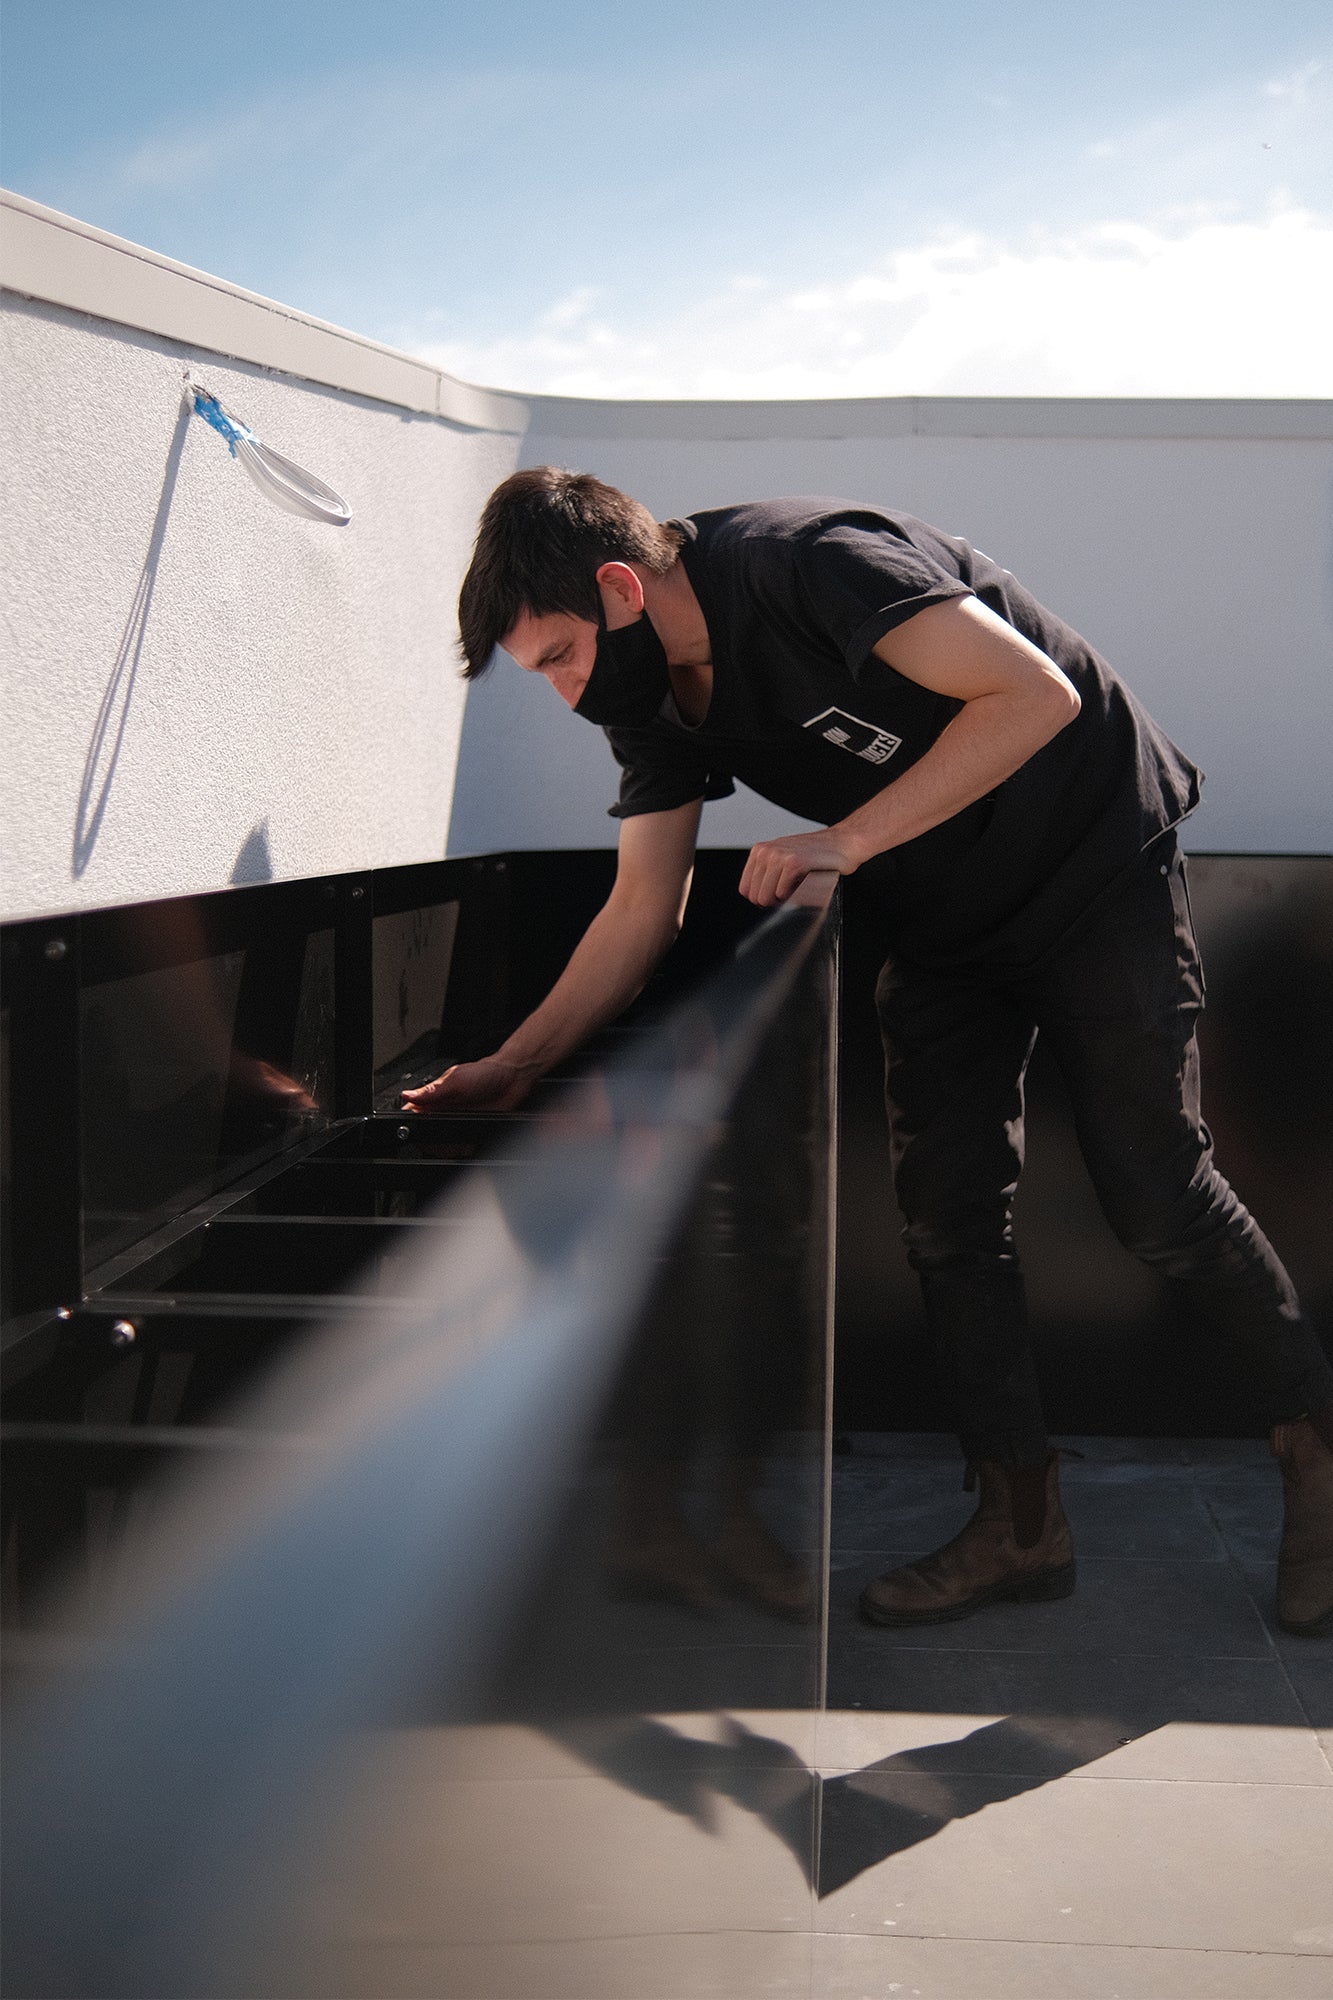 Bloom Box Team member Tom working on an installation of a custom designed aluminum planter box with black powdercoated finish. Made for a rooftop garden on a house in Brunswick. Designed with specific geometery and delivered in flat panels.